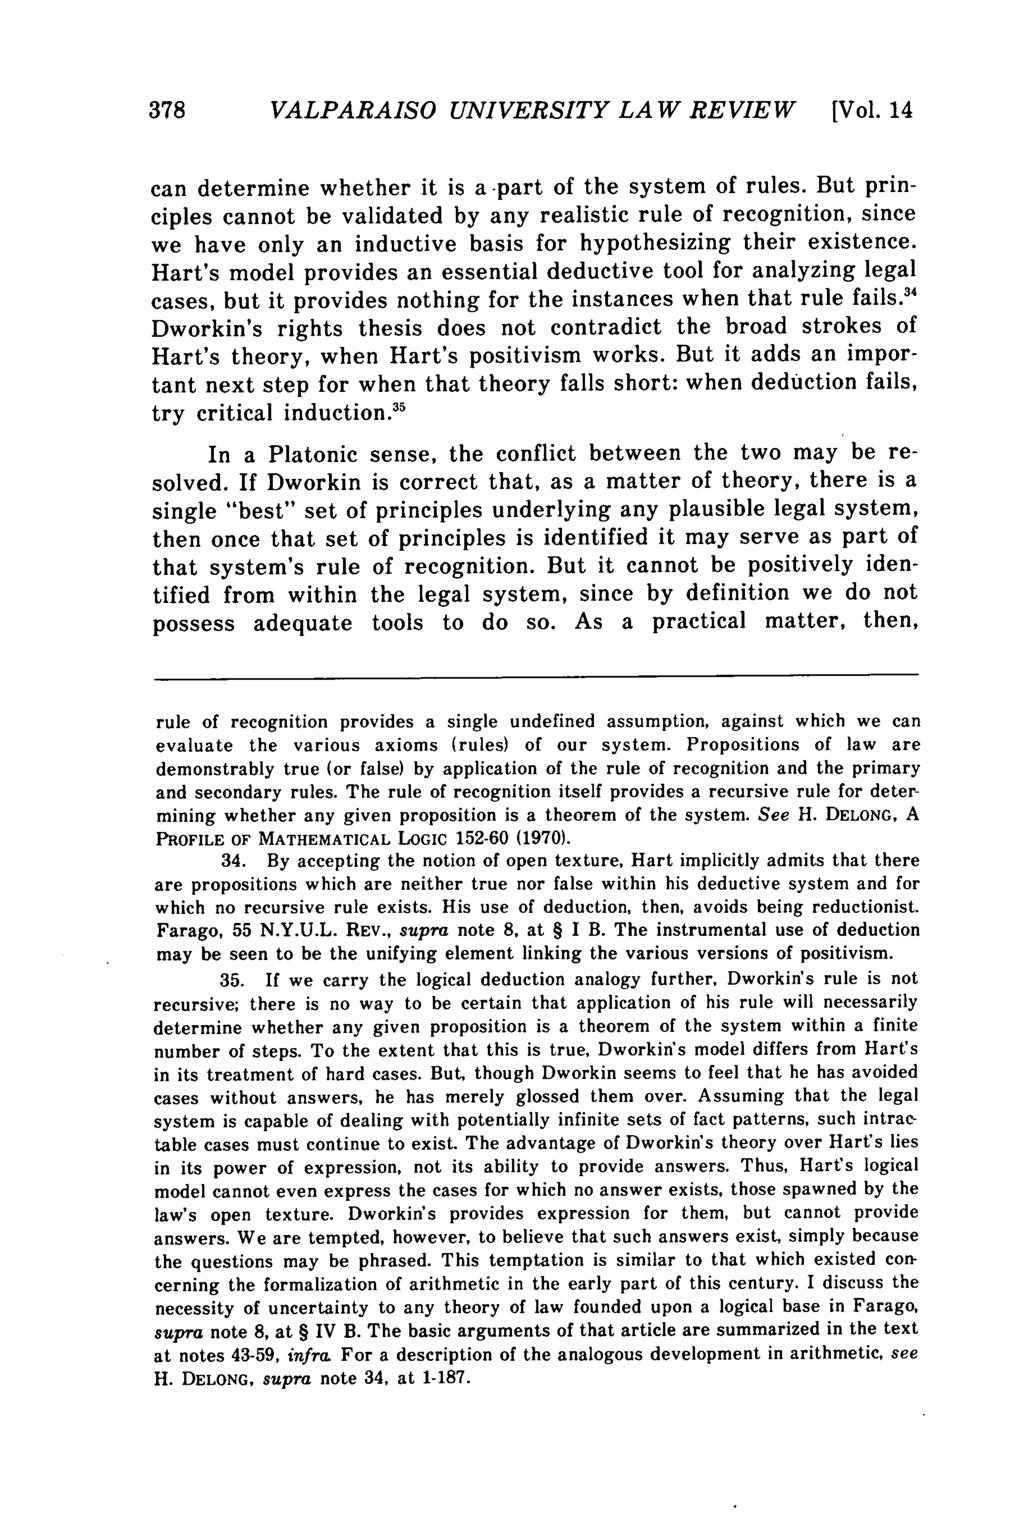 Valparaiso University Law Review, Vol. 14, No. 3 [1980], Art. 1 378 VALPARAISO UNIVERSITY LAW REVIEW [Vol. 14 can determine whether it is a -part of the system of rules.